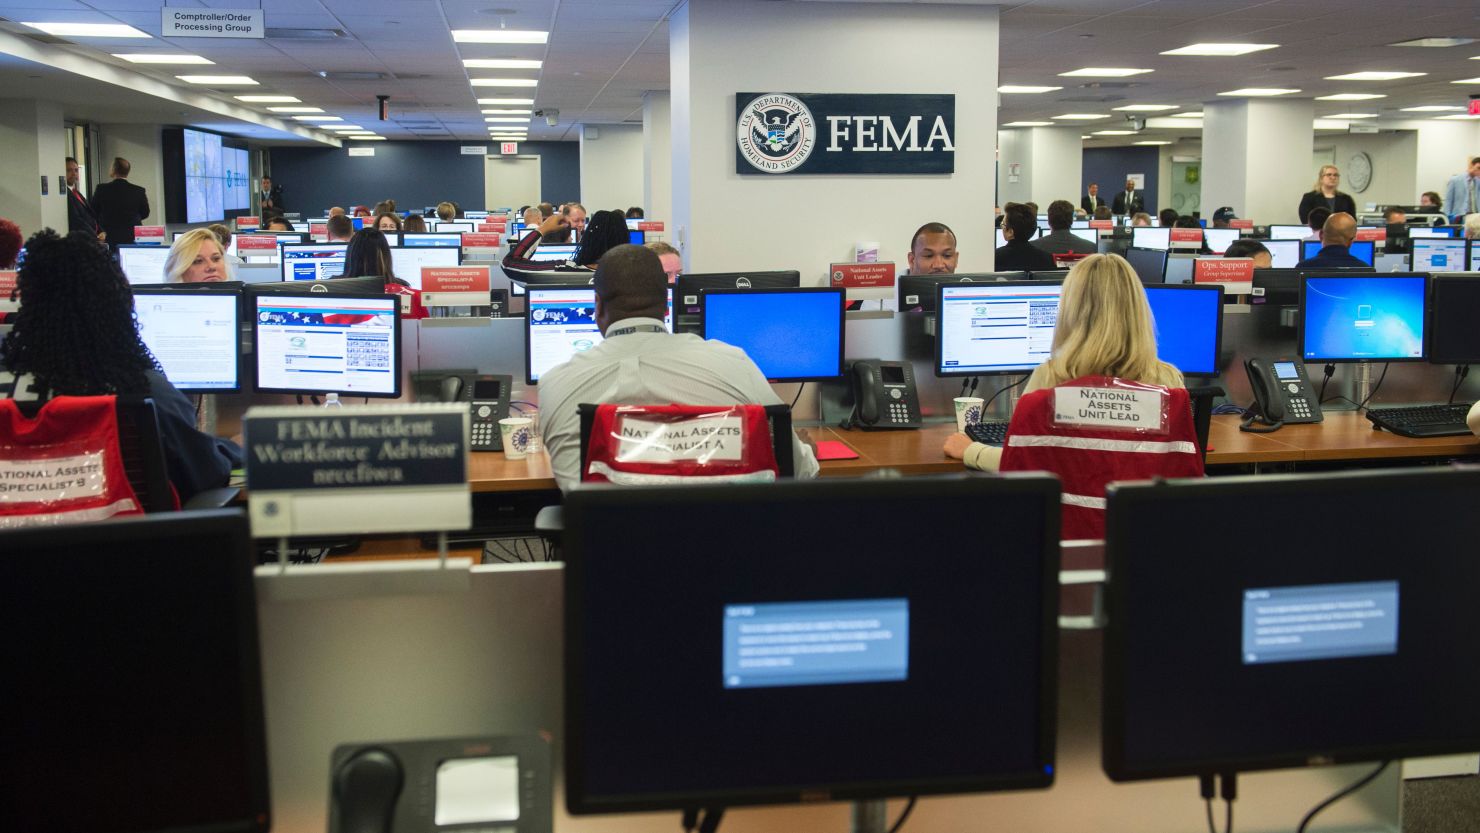 Employees work on computers inside the Command Center at Federal Emergency Management Agency Headquarters in Washington, DC, August 4, 2017. (Saul Loeb/AFP/Getty Images)